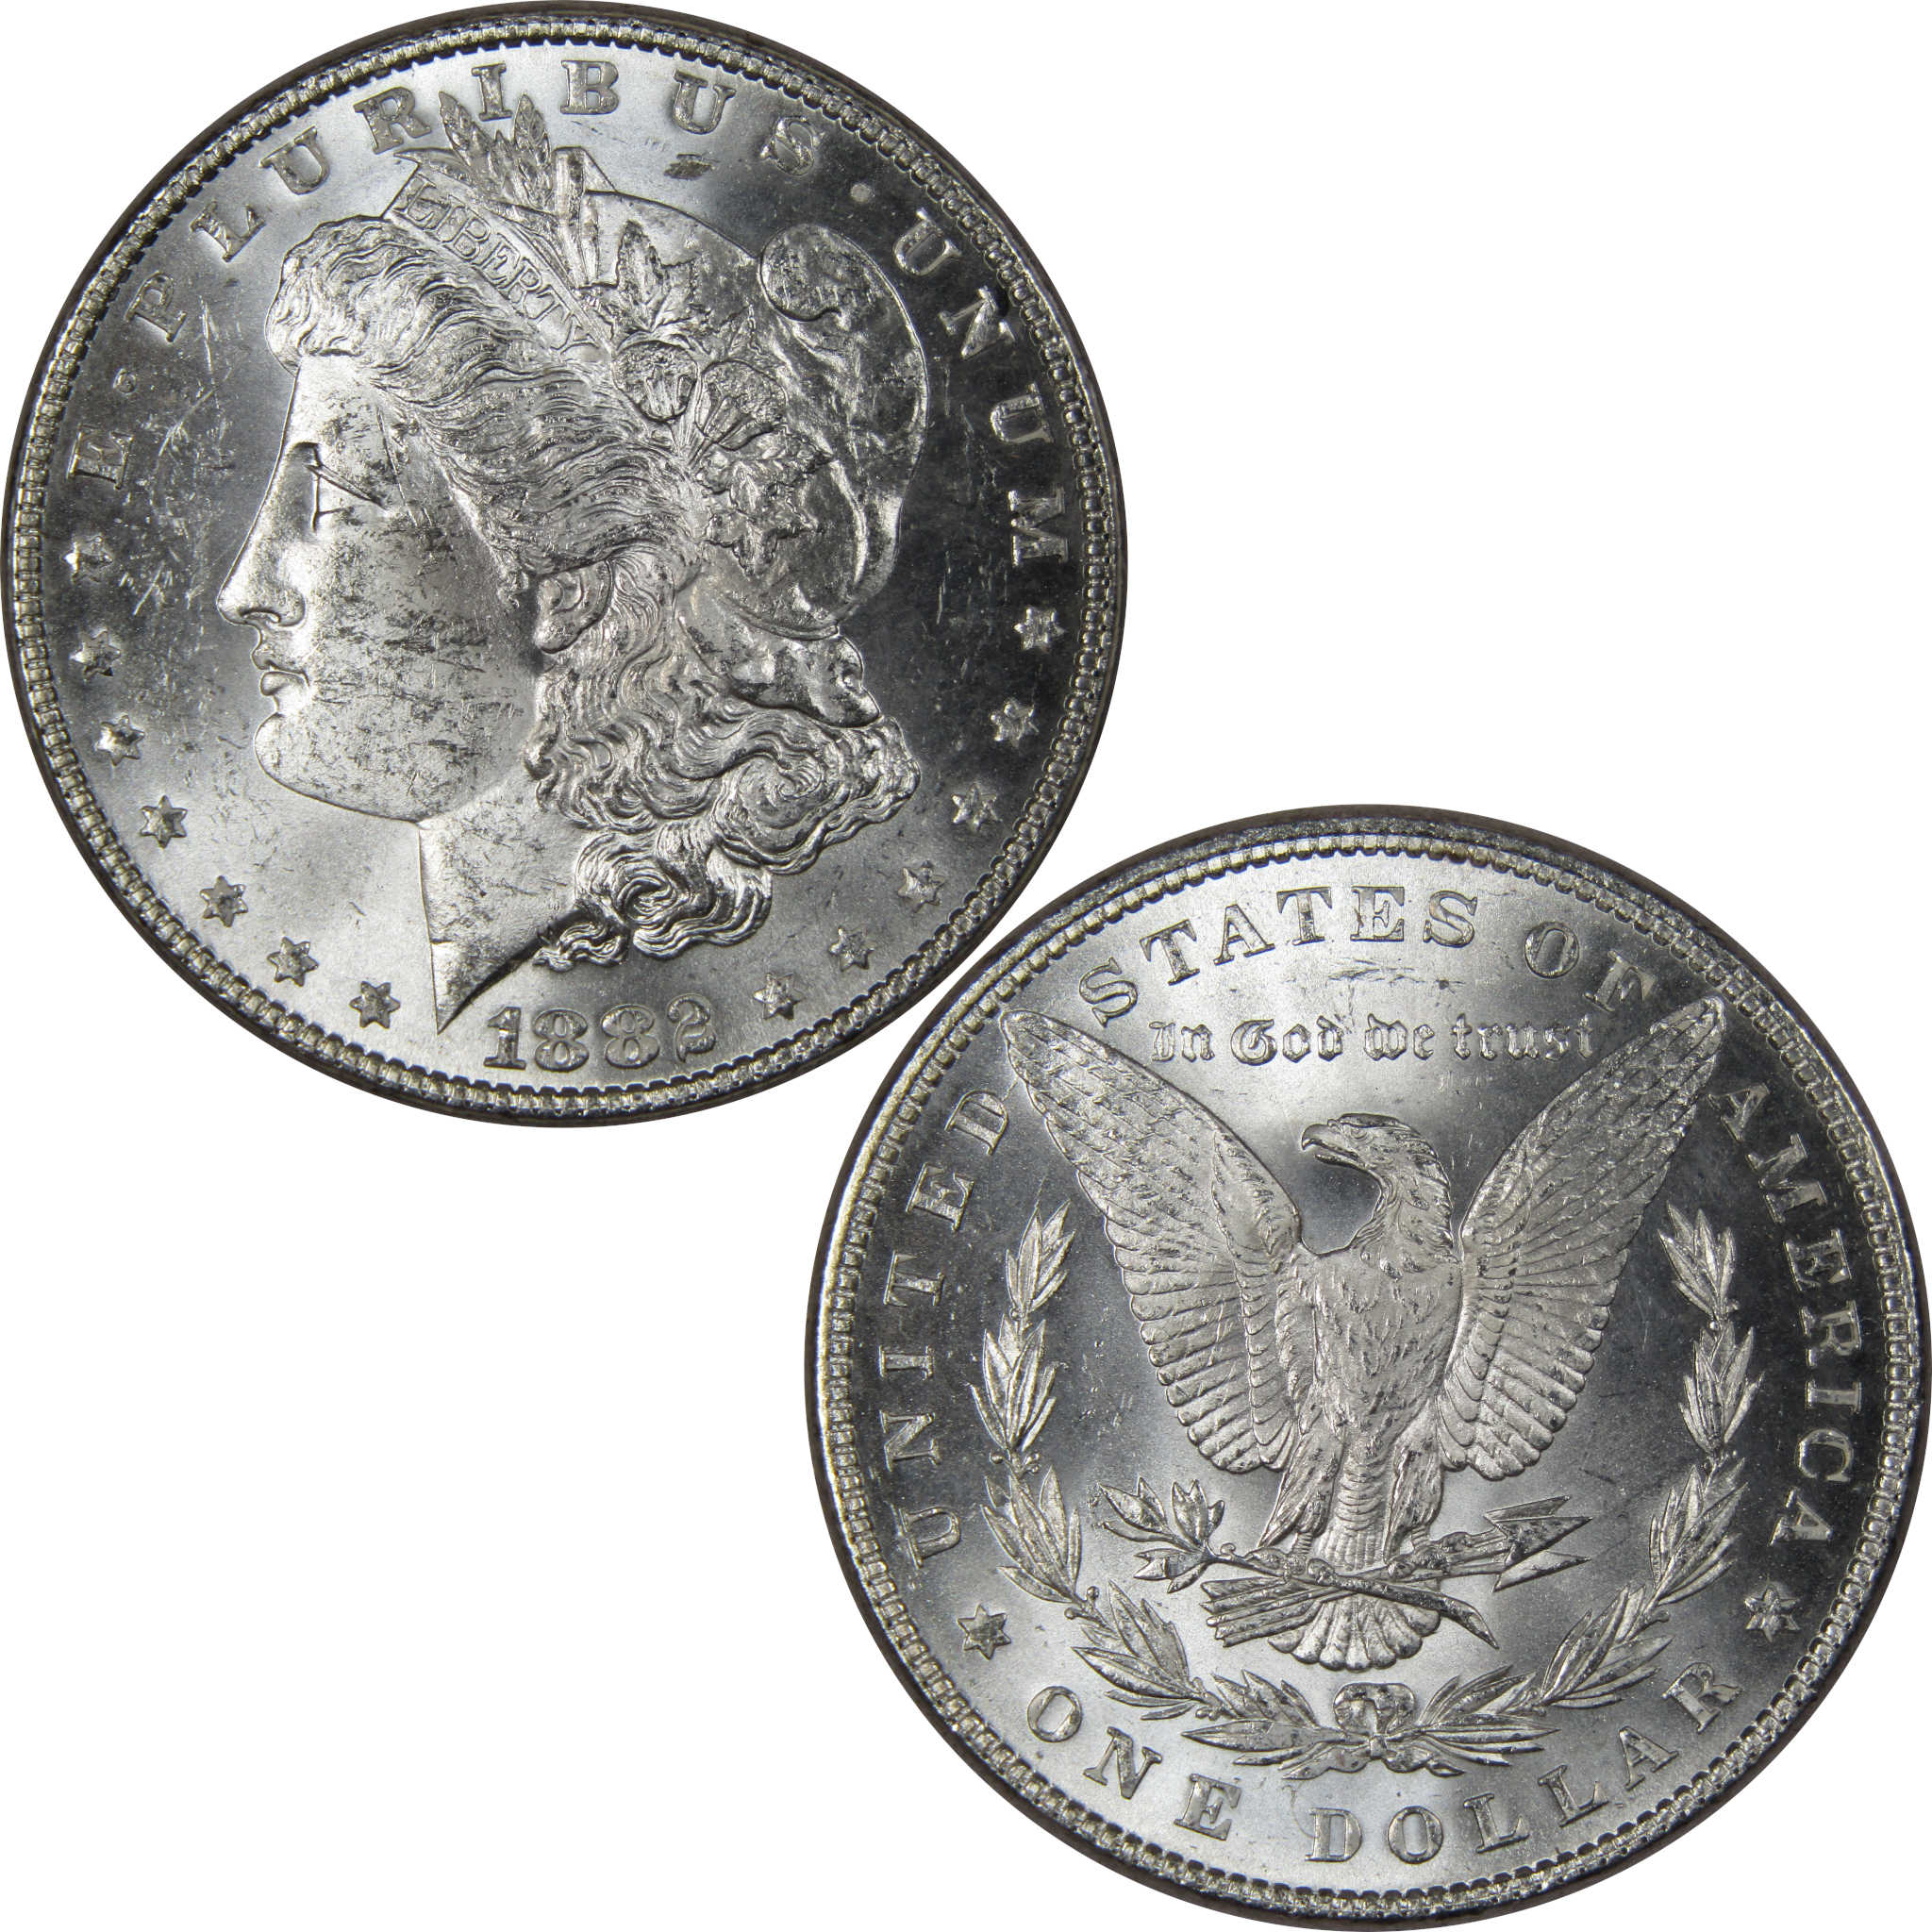 1882 Morgan Dollar BU Uncirculated Mint State 90% Silver SKU:IPC9681 - Morgan coin - Morgan silver dollar - Morgan silver dollar for sale - Profile Coins &amp; Collectibles